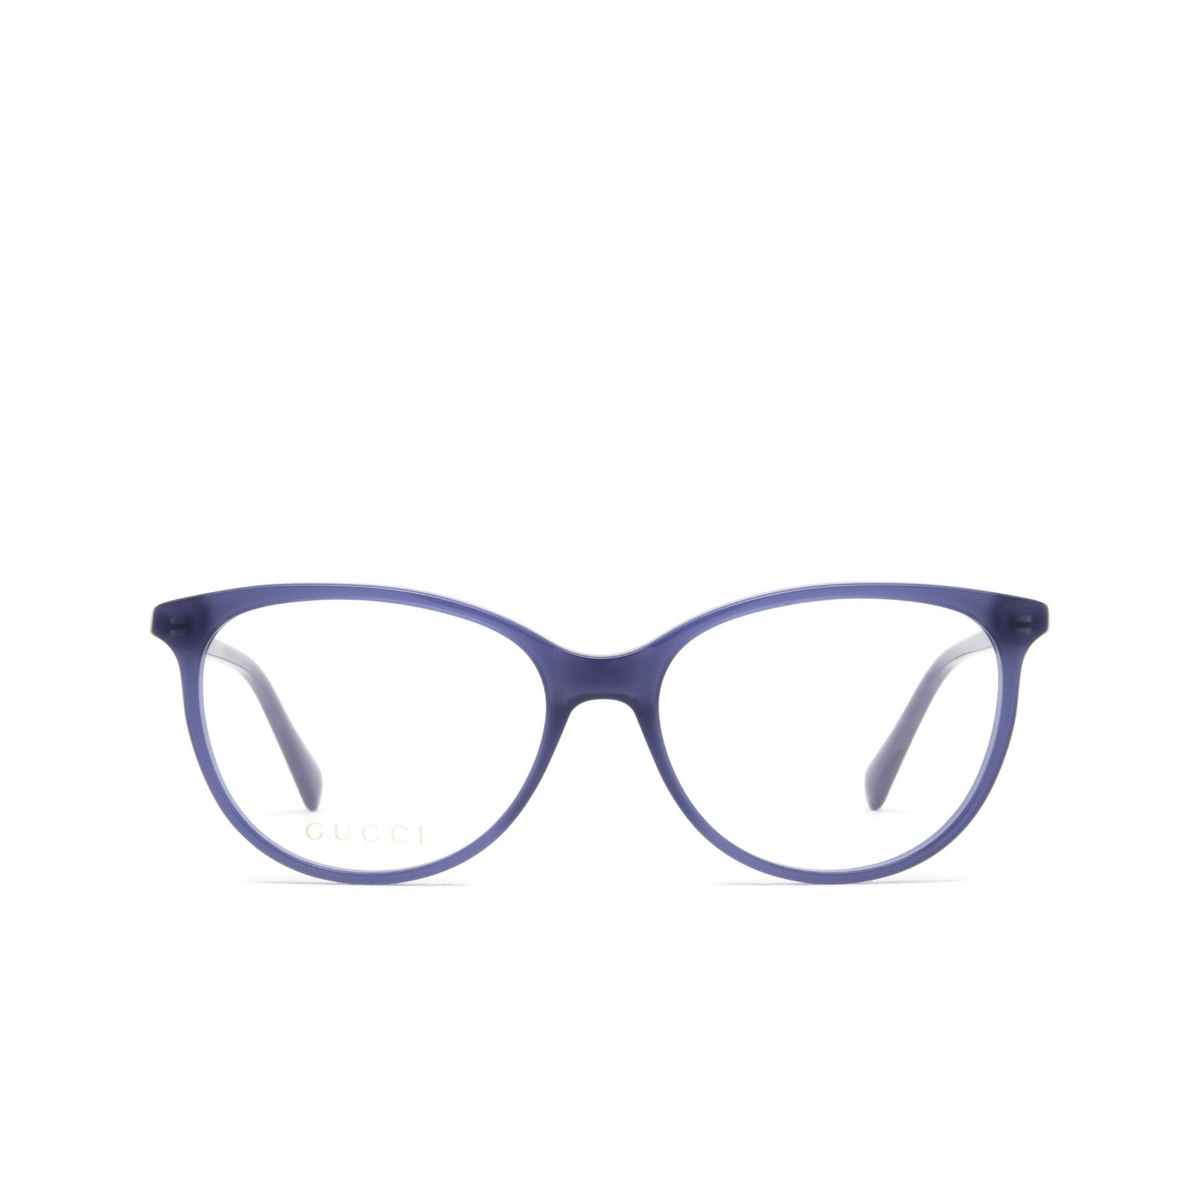 Gucci® Cat-eye Eyeglasses: GG0550O color Blue 010 - front view.